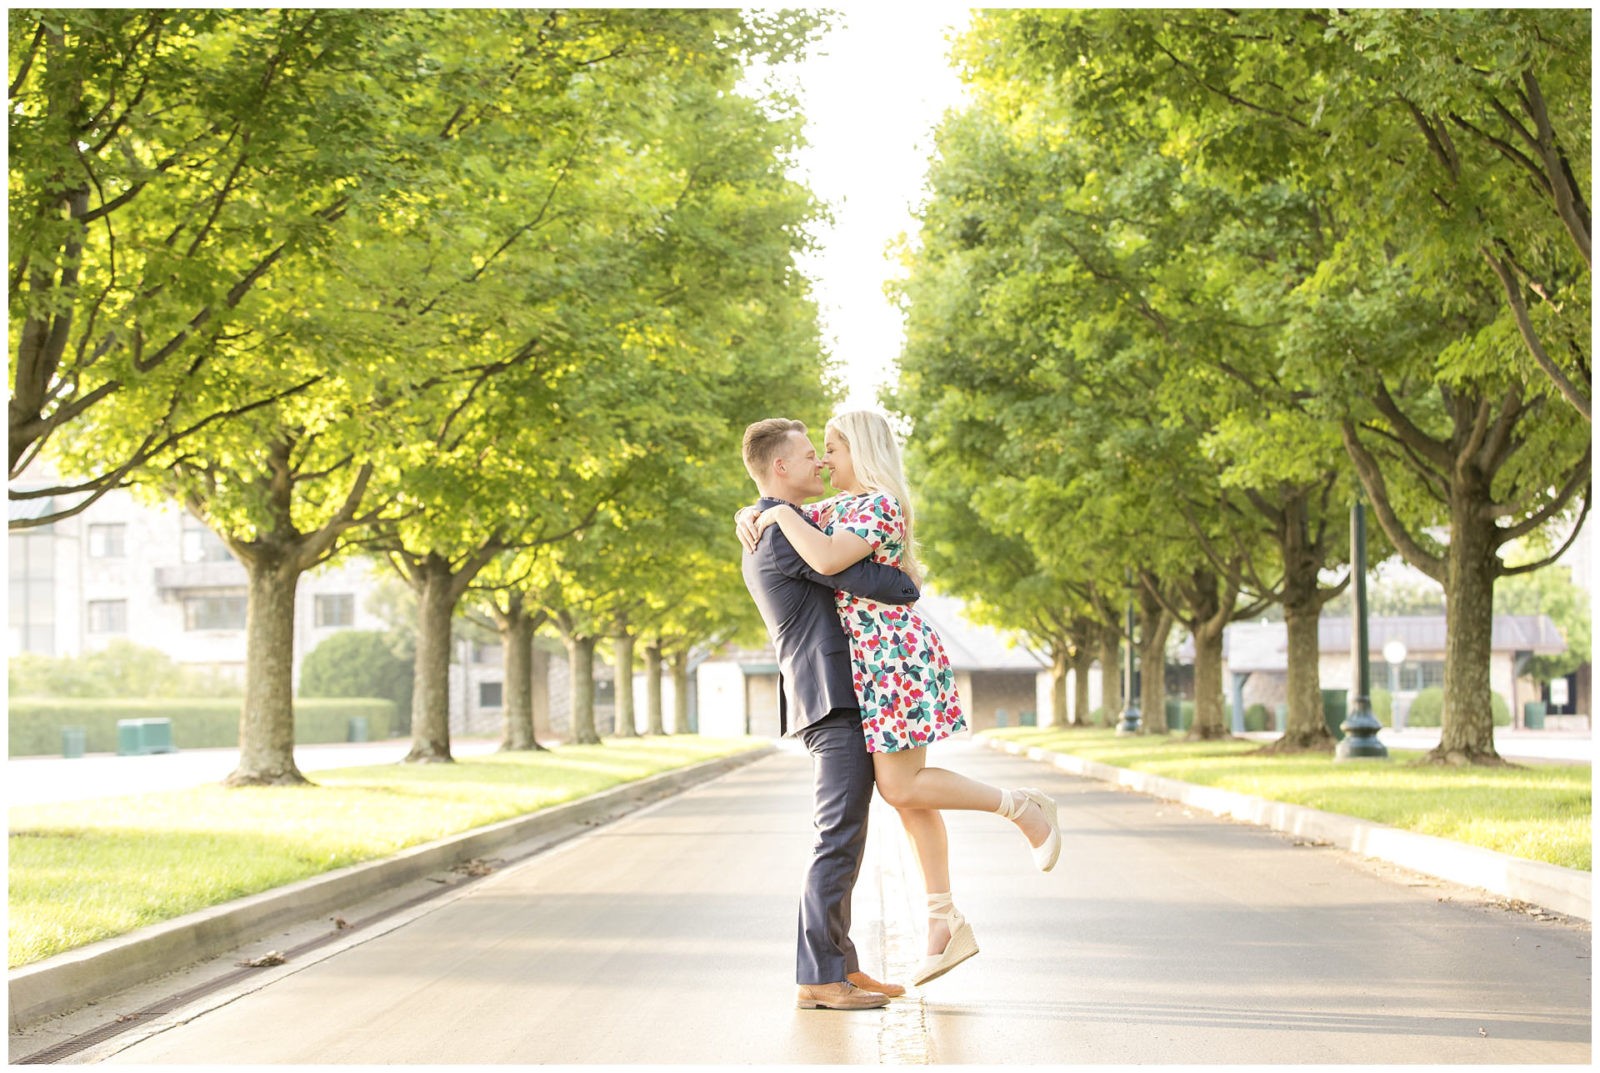 Keeneland Trees Engagement Session in Lexington, Kentucky.